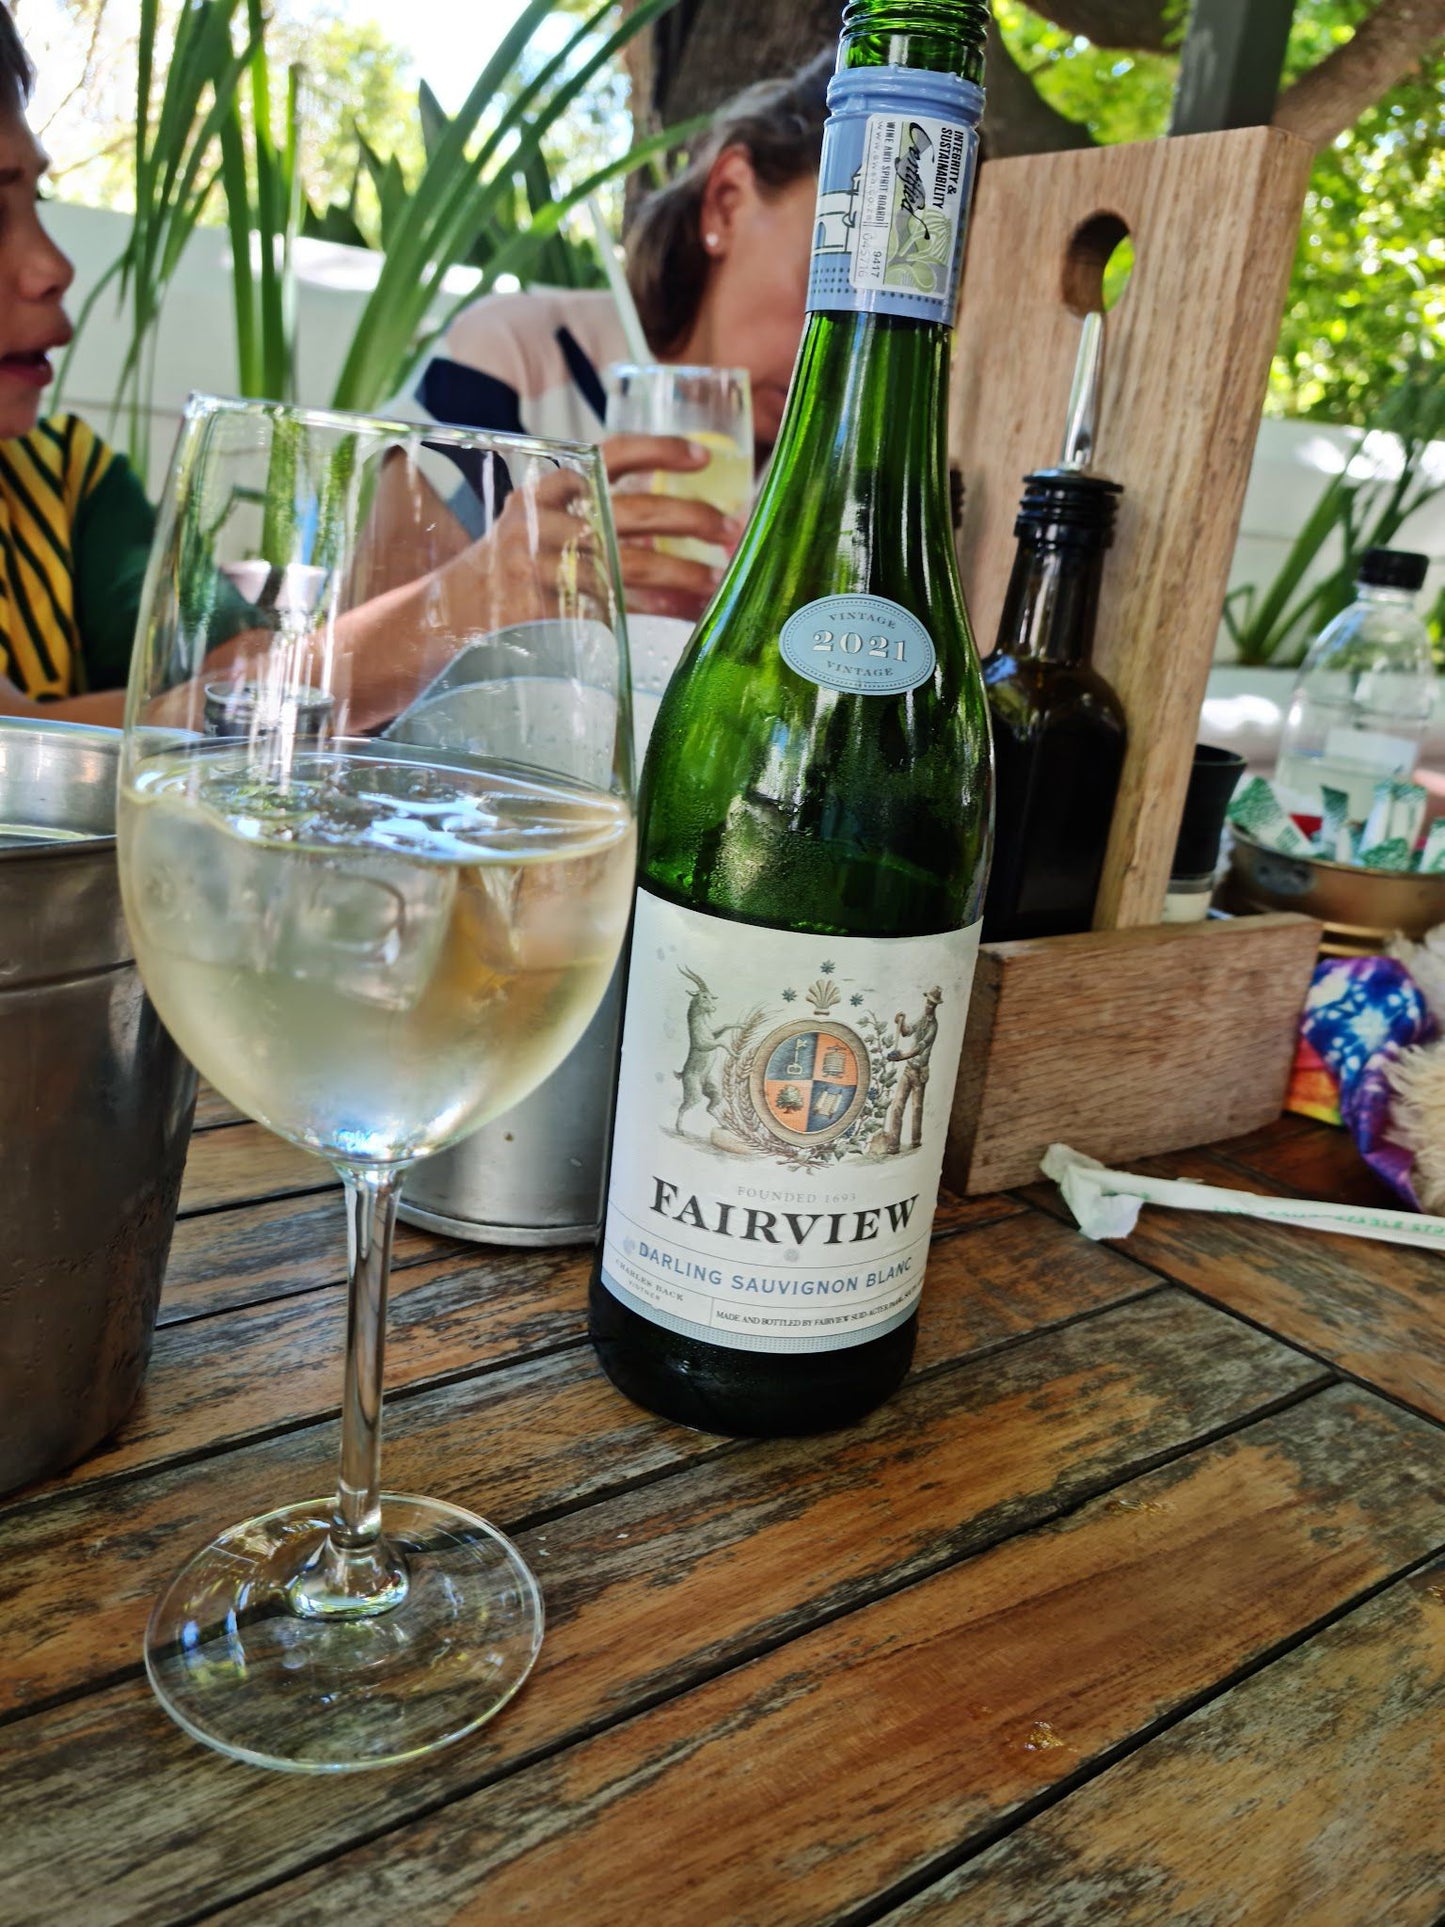  Fairview Wine and Cheese